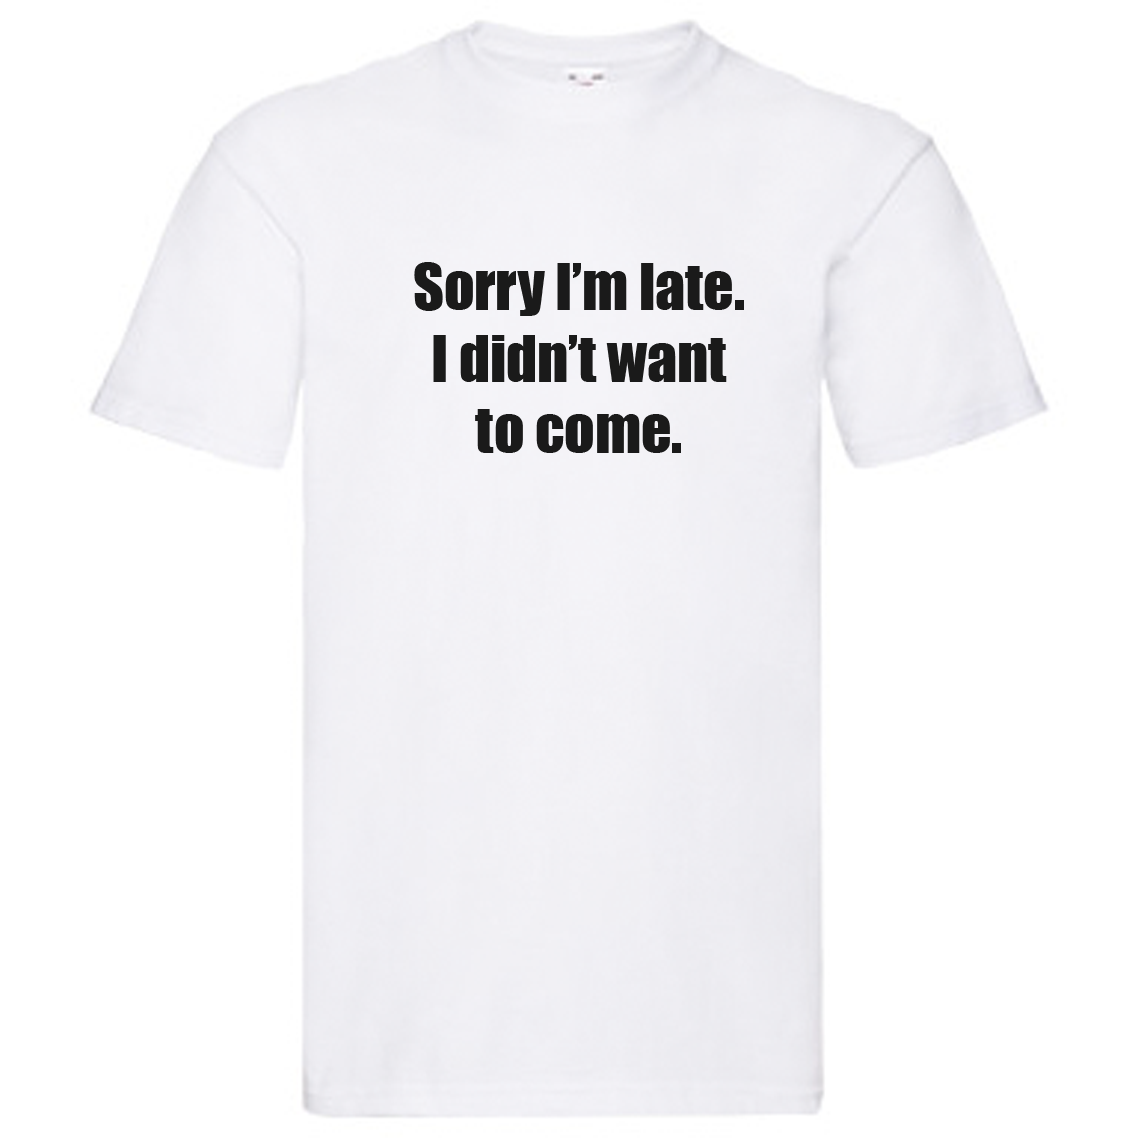 T-Shirt - Sorry I'm late, I didn't want to come.